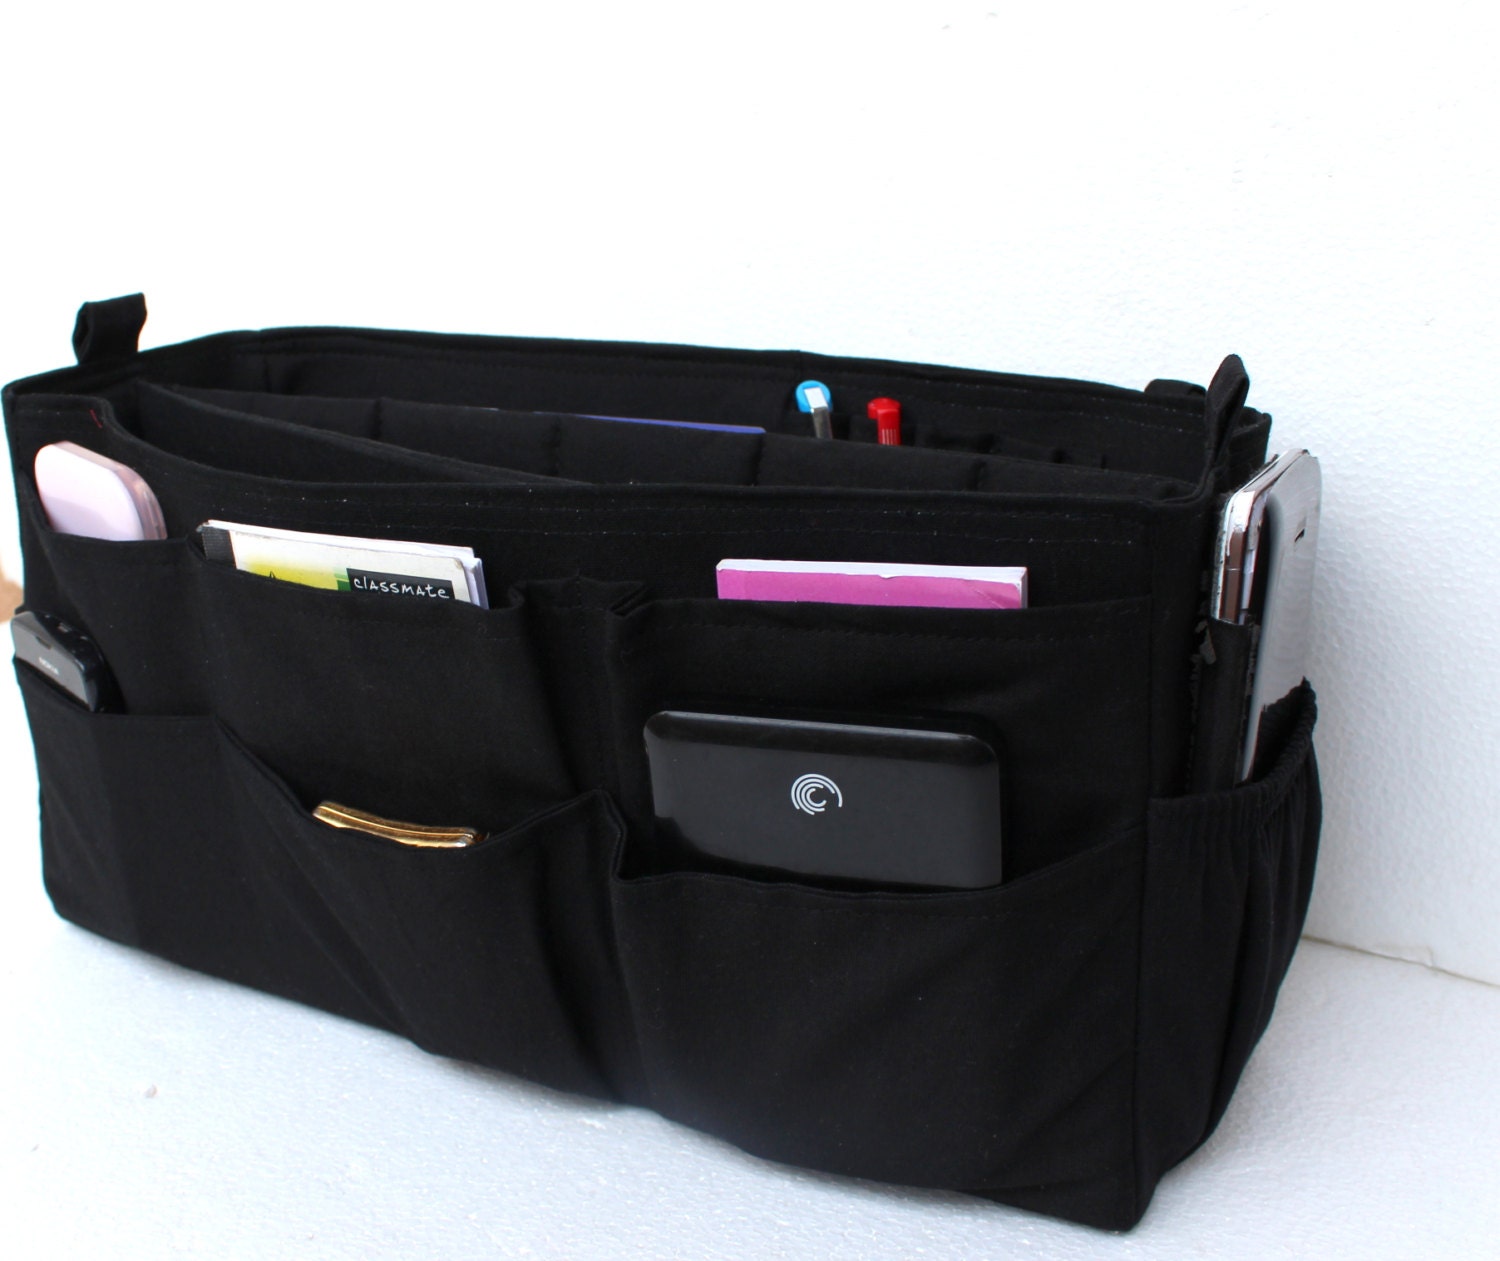 Purse Organizer Insert for Large Purses or Diaper Bags